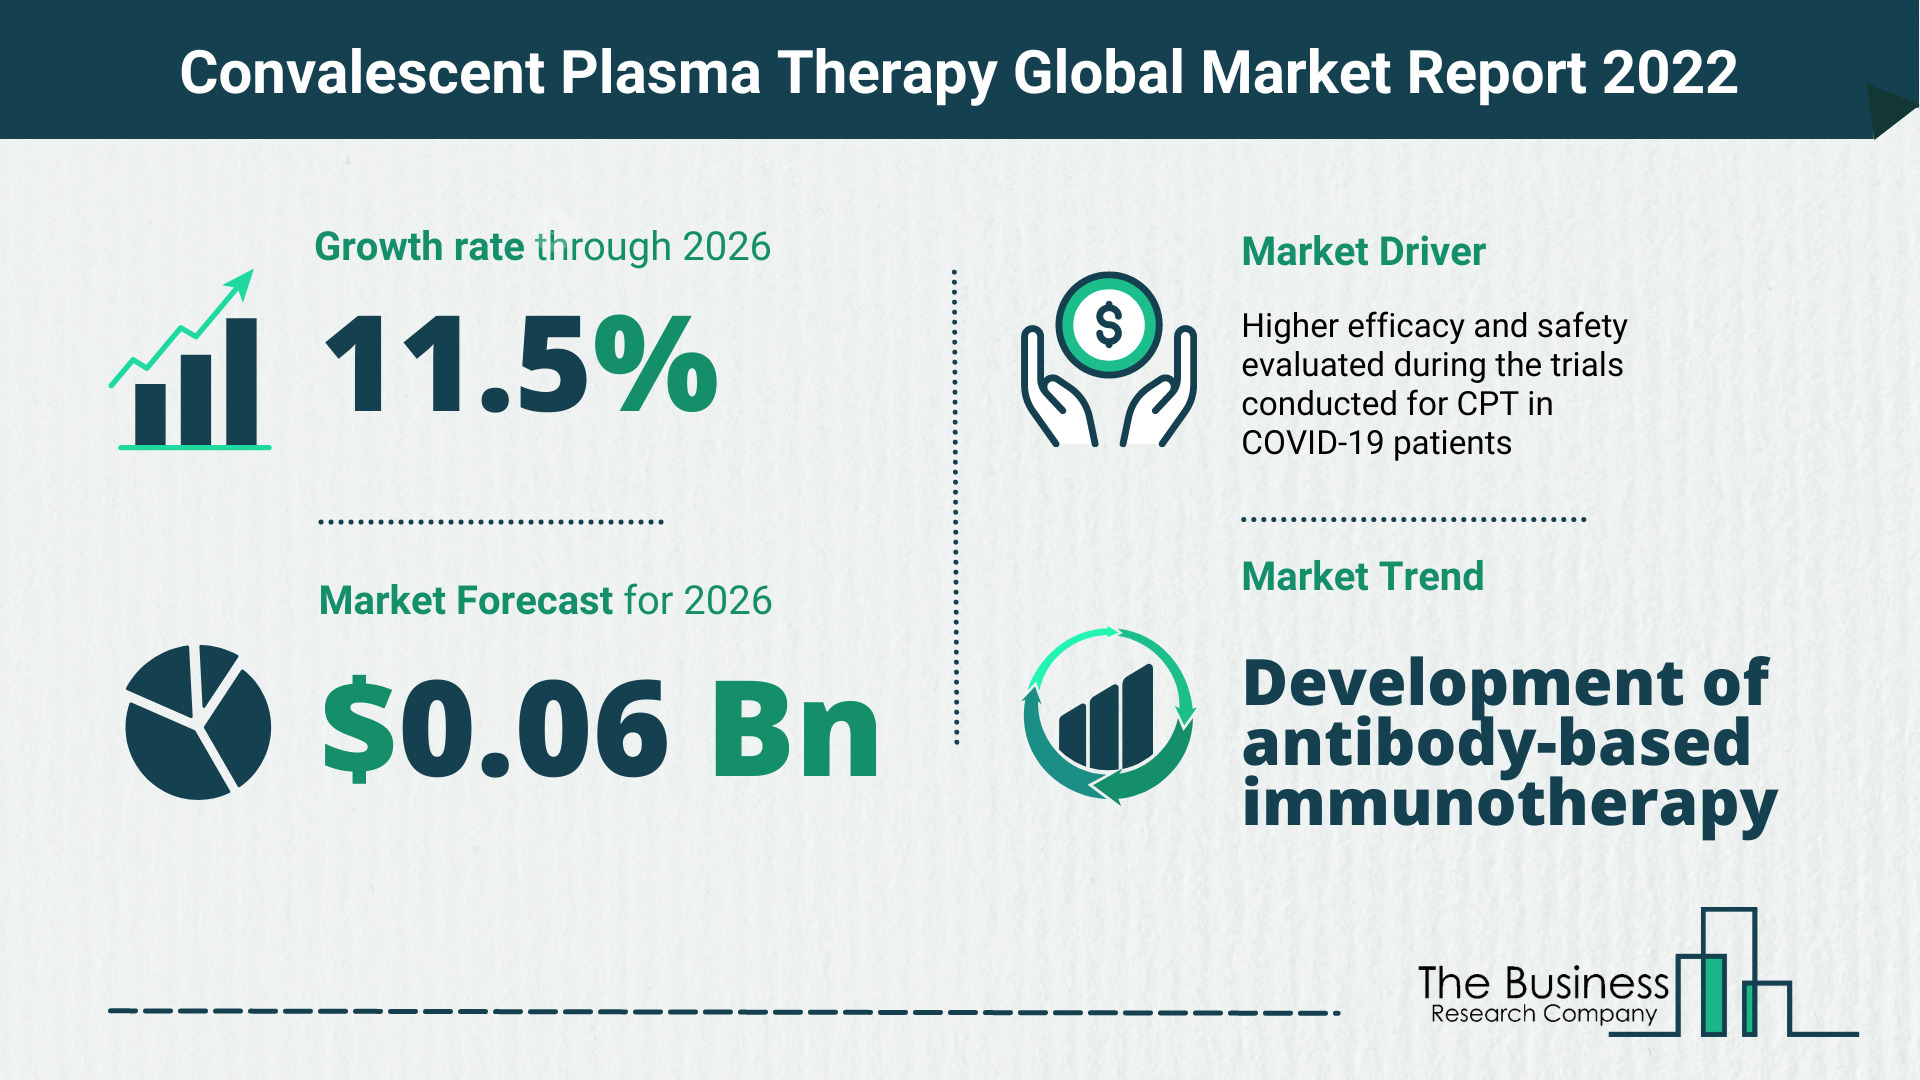 The Convalescent Plasma Therapy Market Share, Market Size, And Growth Rate 2022